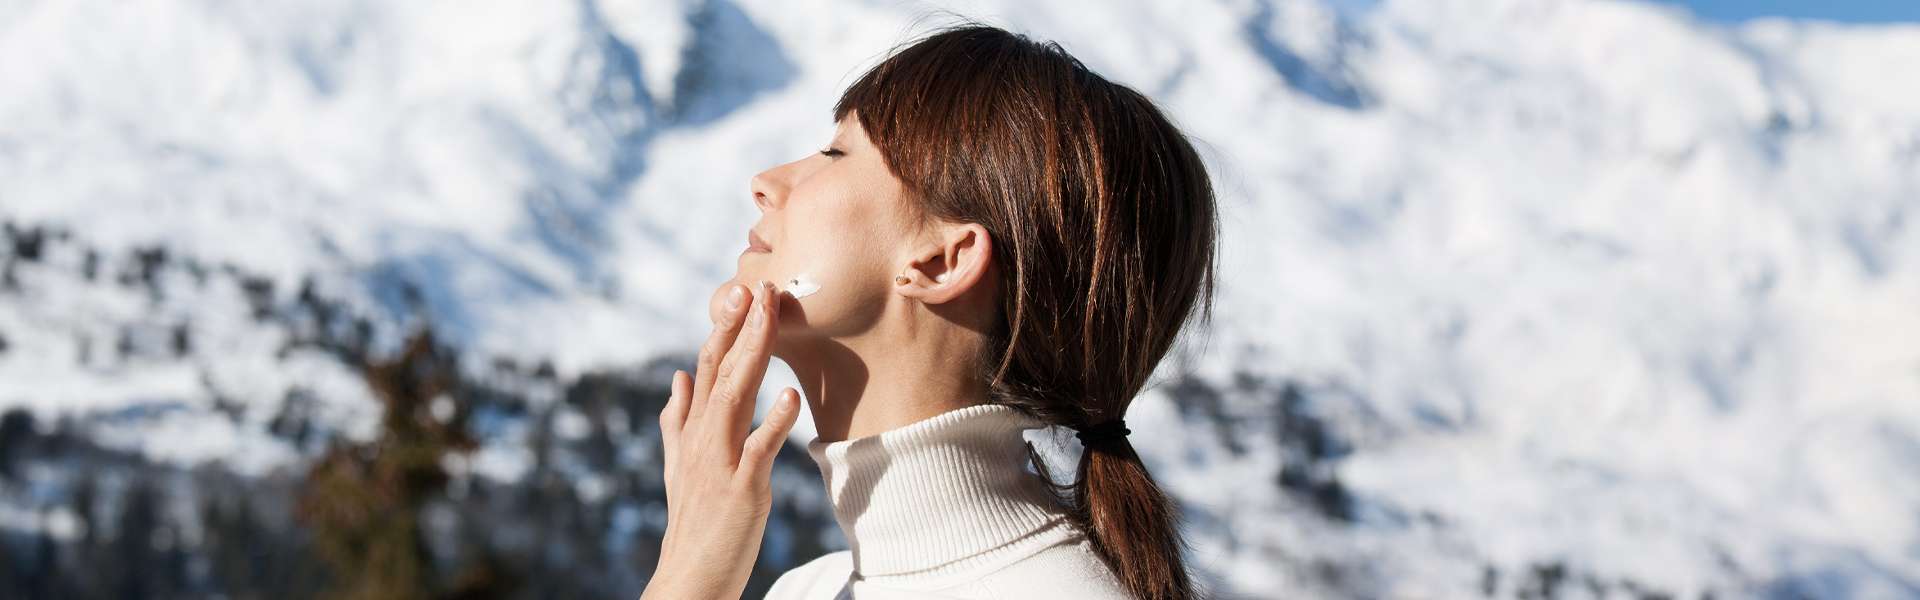 Protect the skin from winter rigor: cosmetics and nutrition